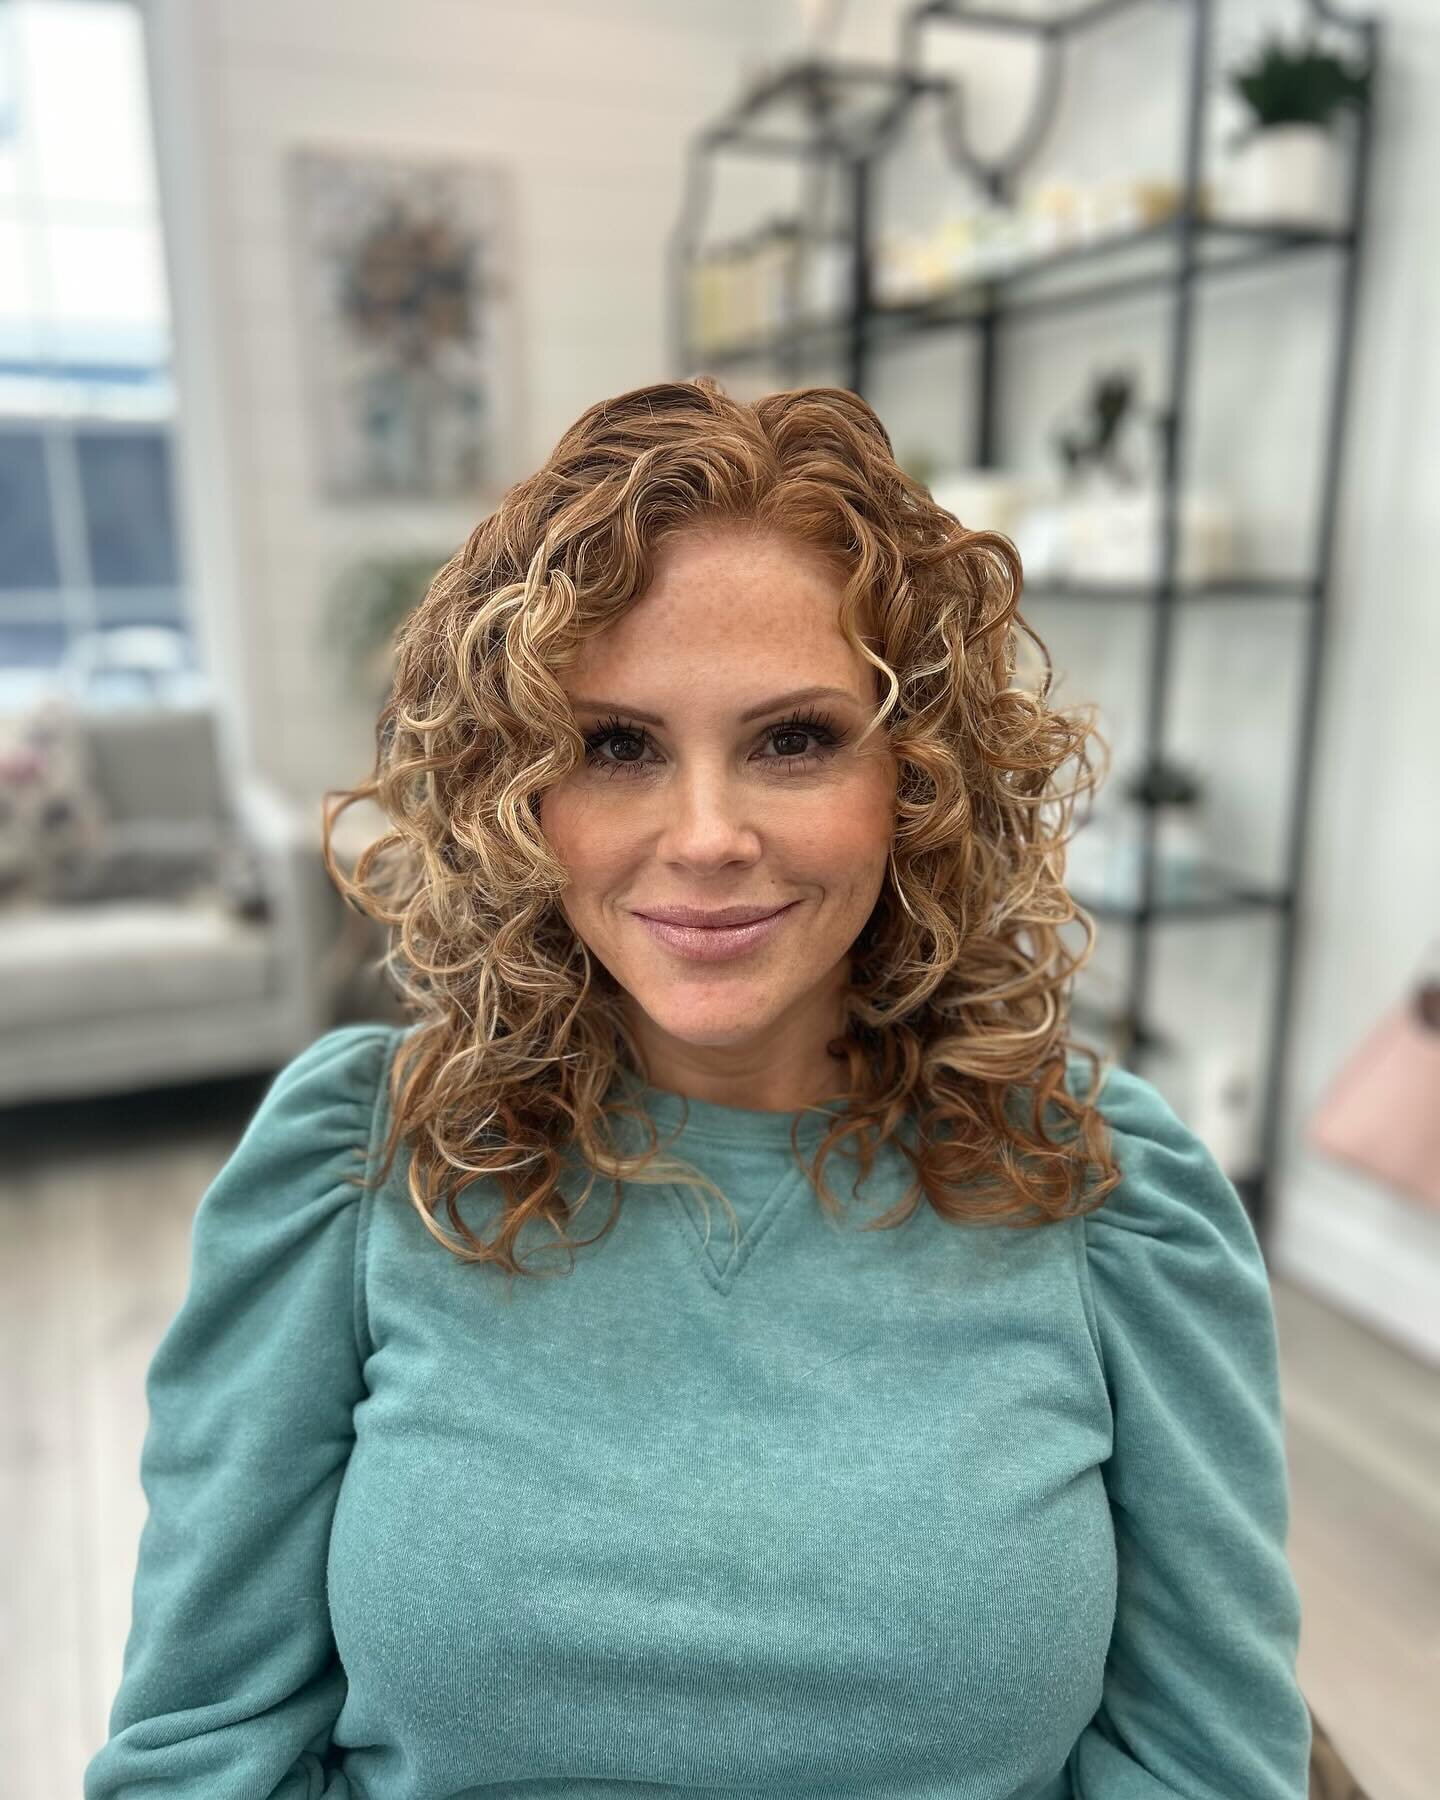 Before and after photos of recent curly cuts!

I&rsquo;ve been specializing in curly cuts since 2007. I dry cut the curls so I can see exactly how they will fall, spring factor and intensity of curl. I use all @davinesofficial curl enhancing products